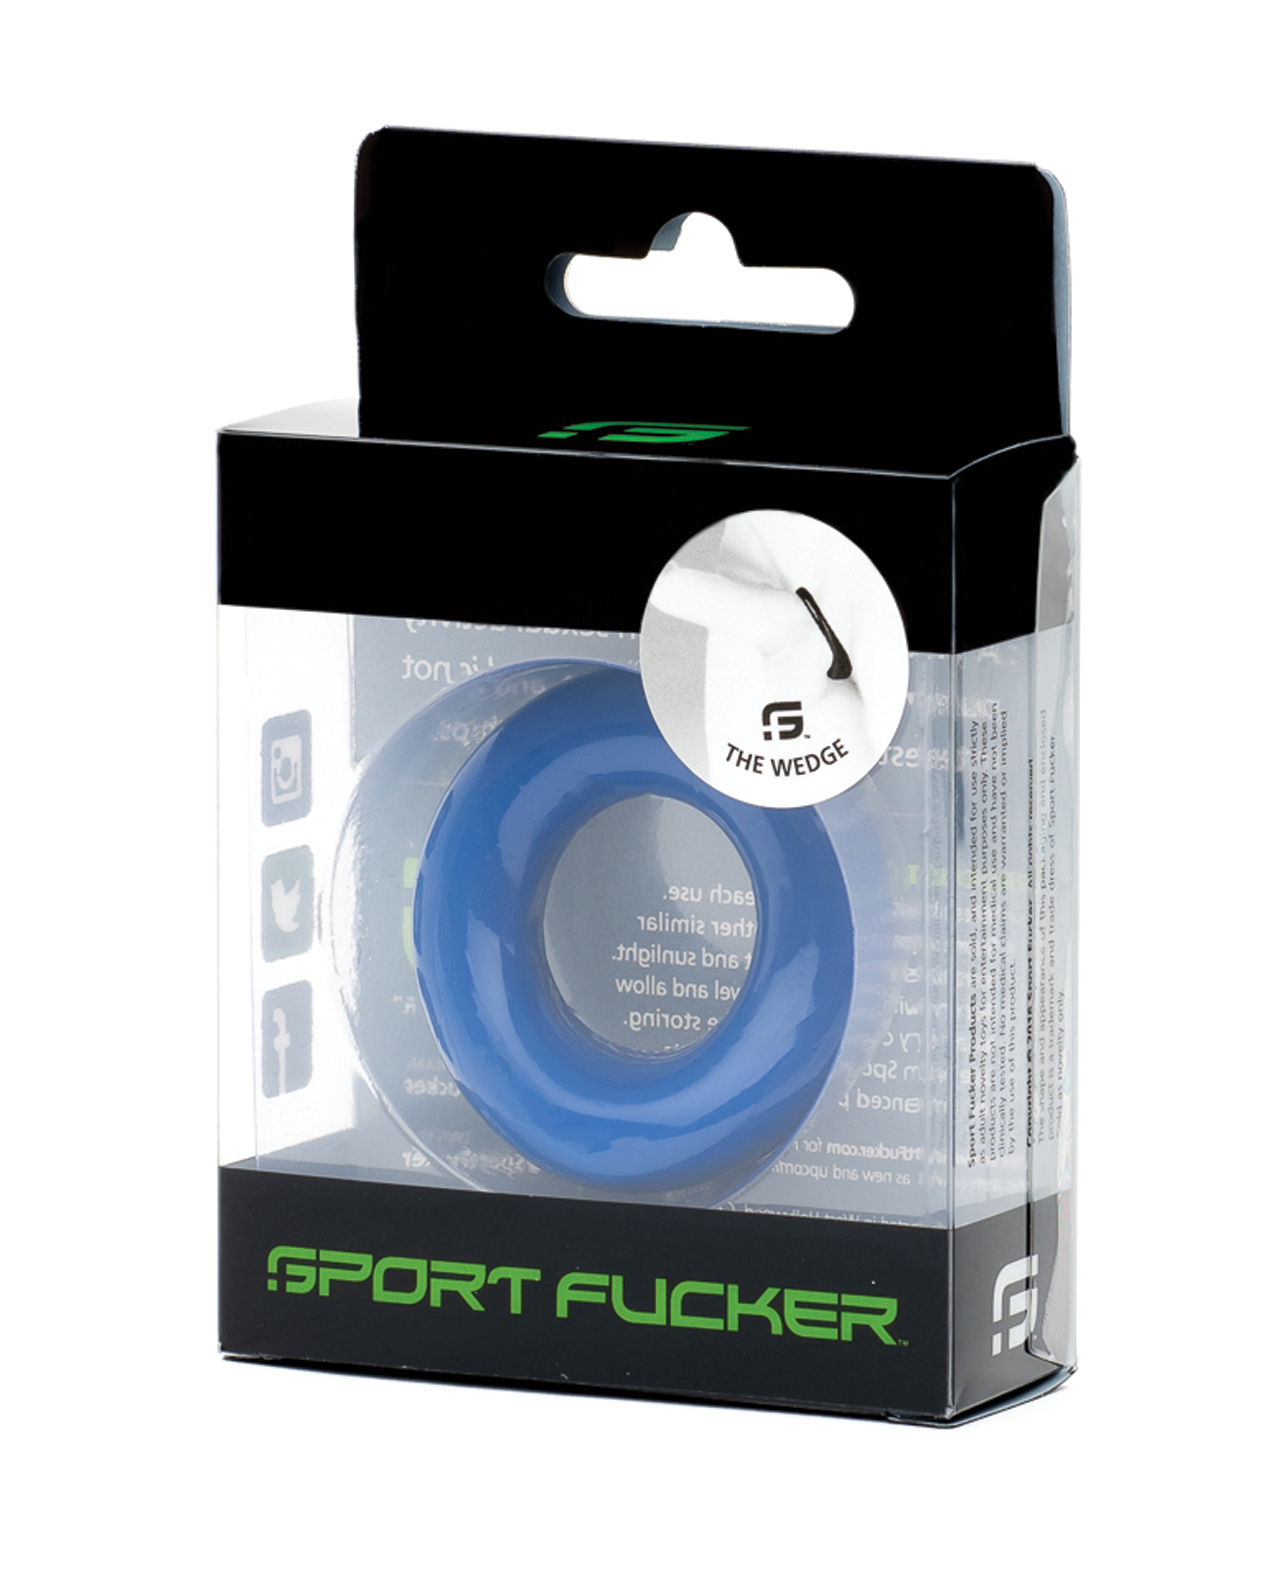 Sport Fucker Silicone The Wedge cock ring in Blue in a clear and black package that says Sports Fucker in Green along the bottom